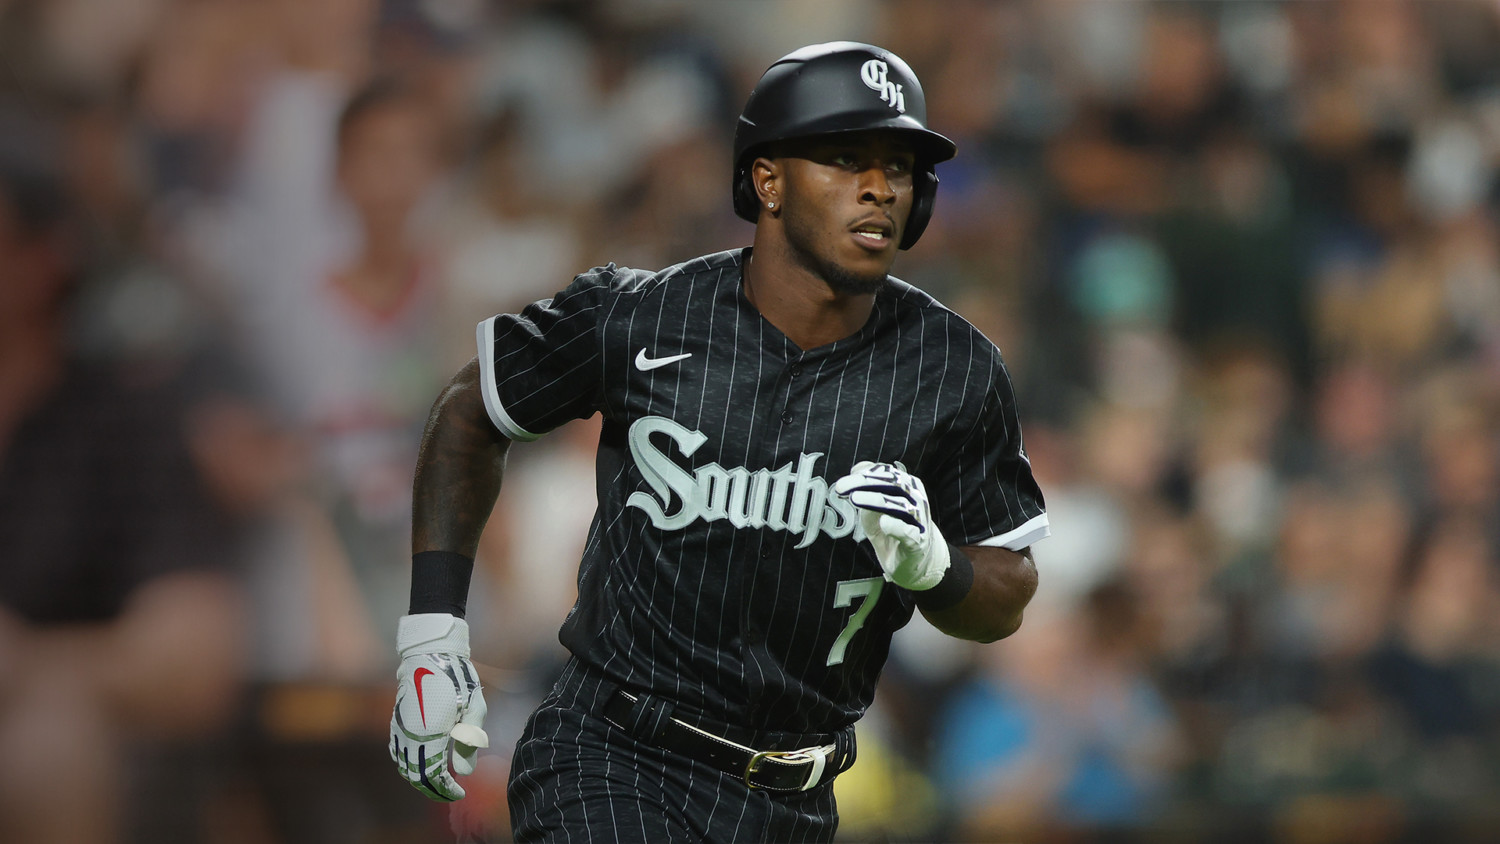 TIM ANDERSON CHICAGO WHITE SOX SOUTHSIDE CITY